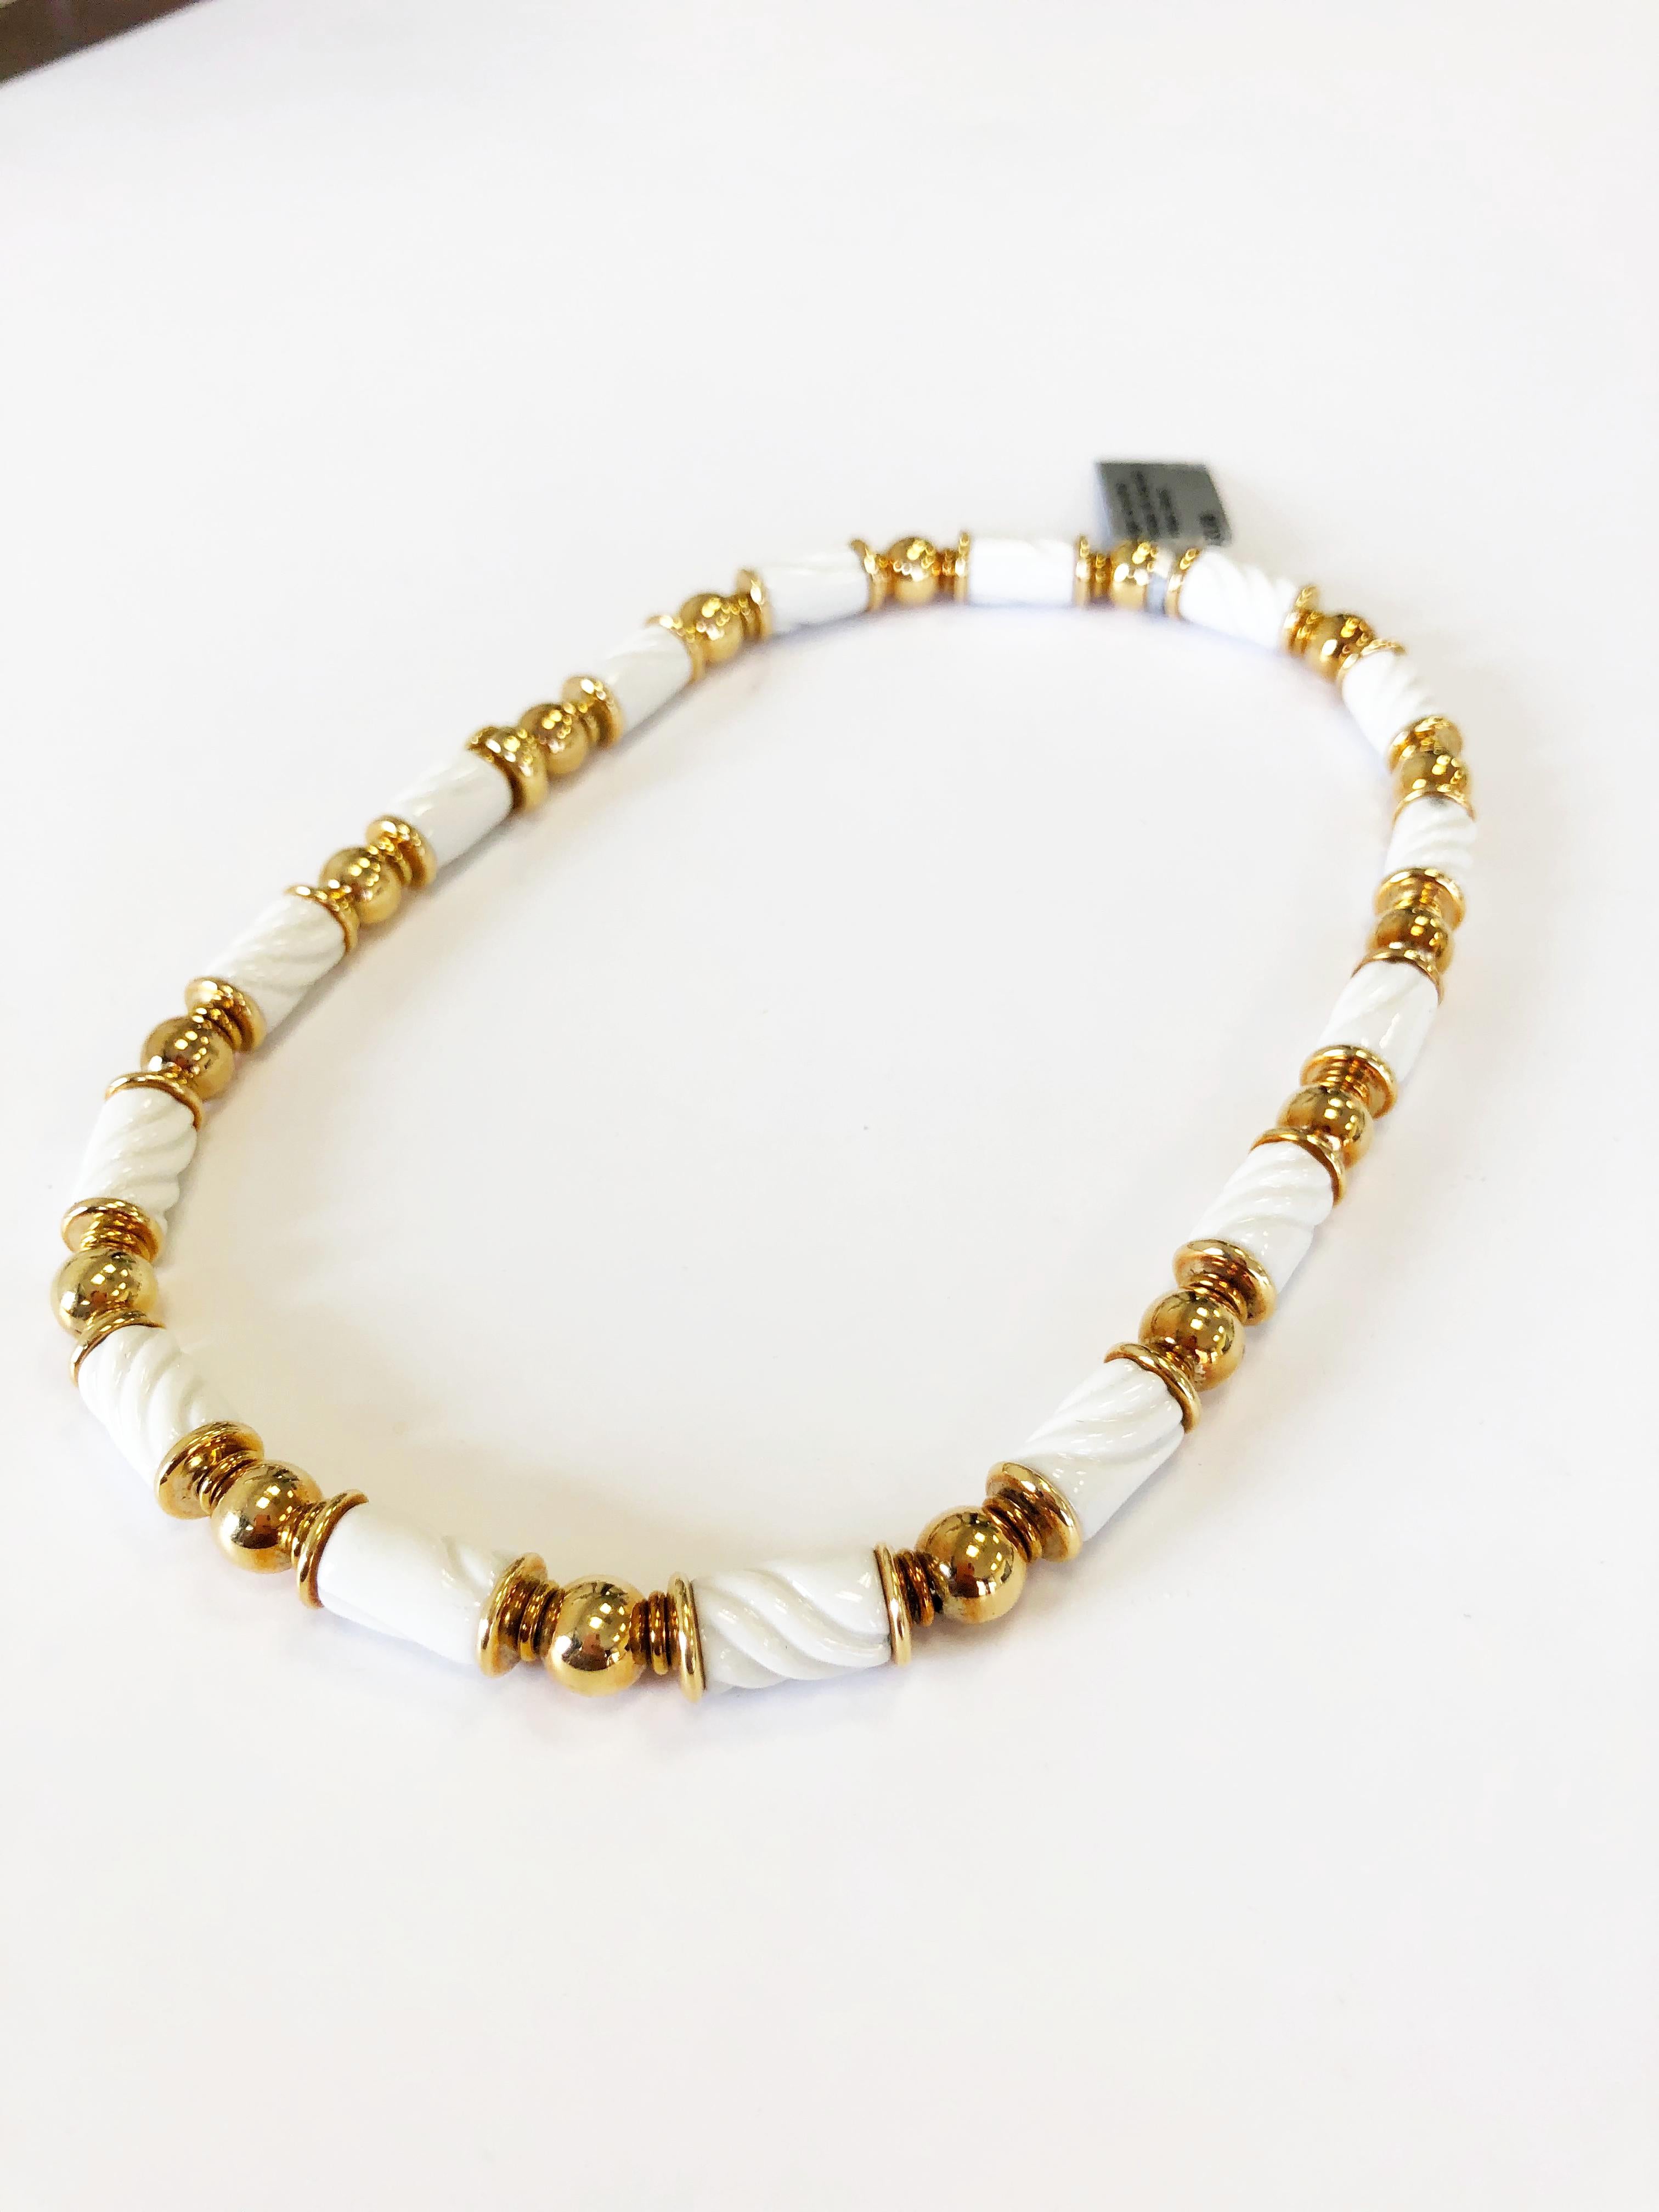 Classic Bvlgari Chandra carved white porcelain necklace in 18k yellow gold.  This design is commonly symbolic to Bulgari and is a part of an entire collection.  Great price for this evergreen piece.  Perfect for someone who loves Bulgari pieces for